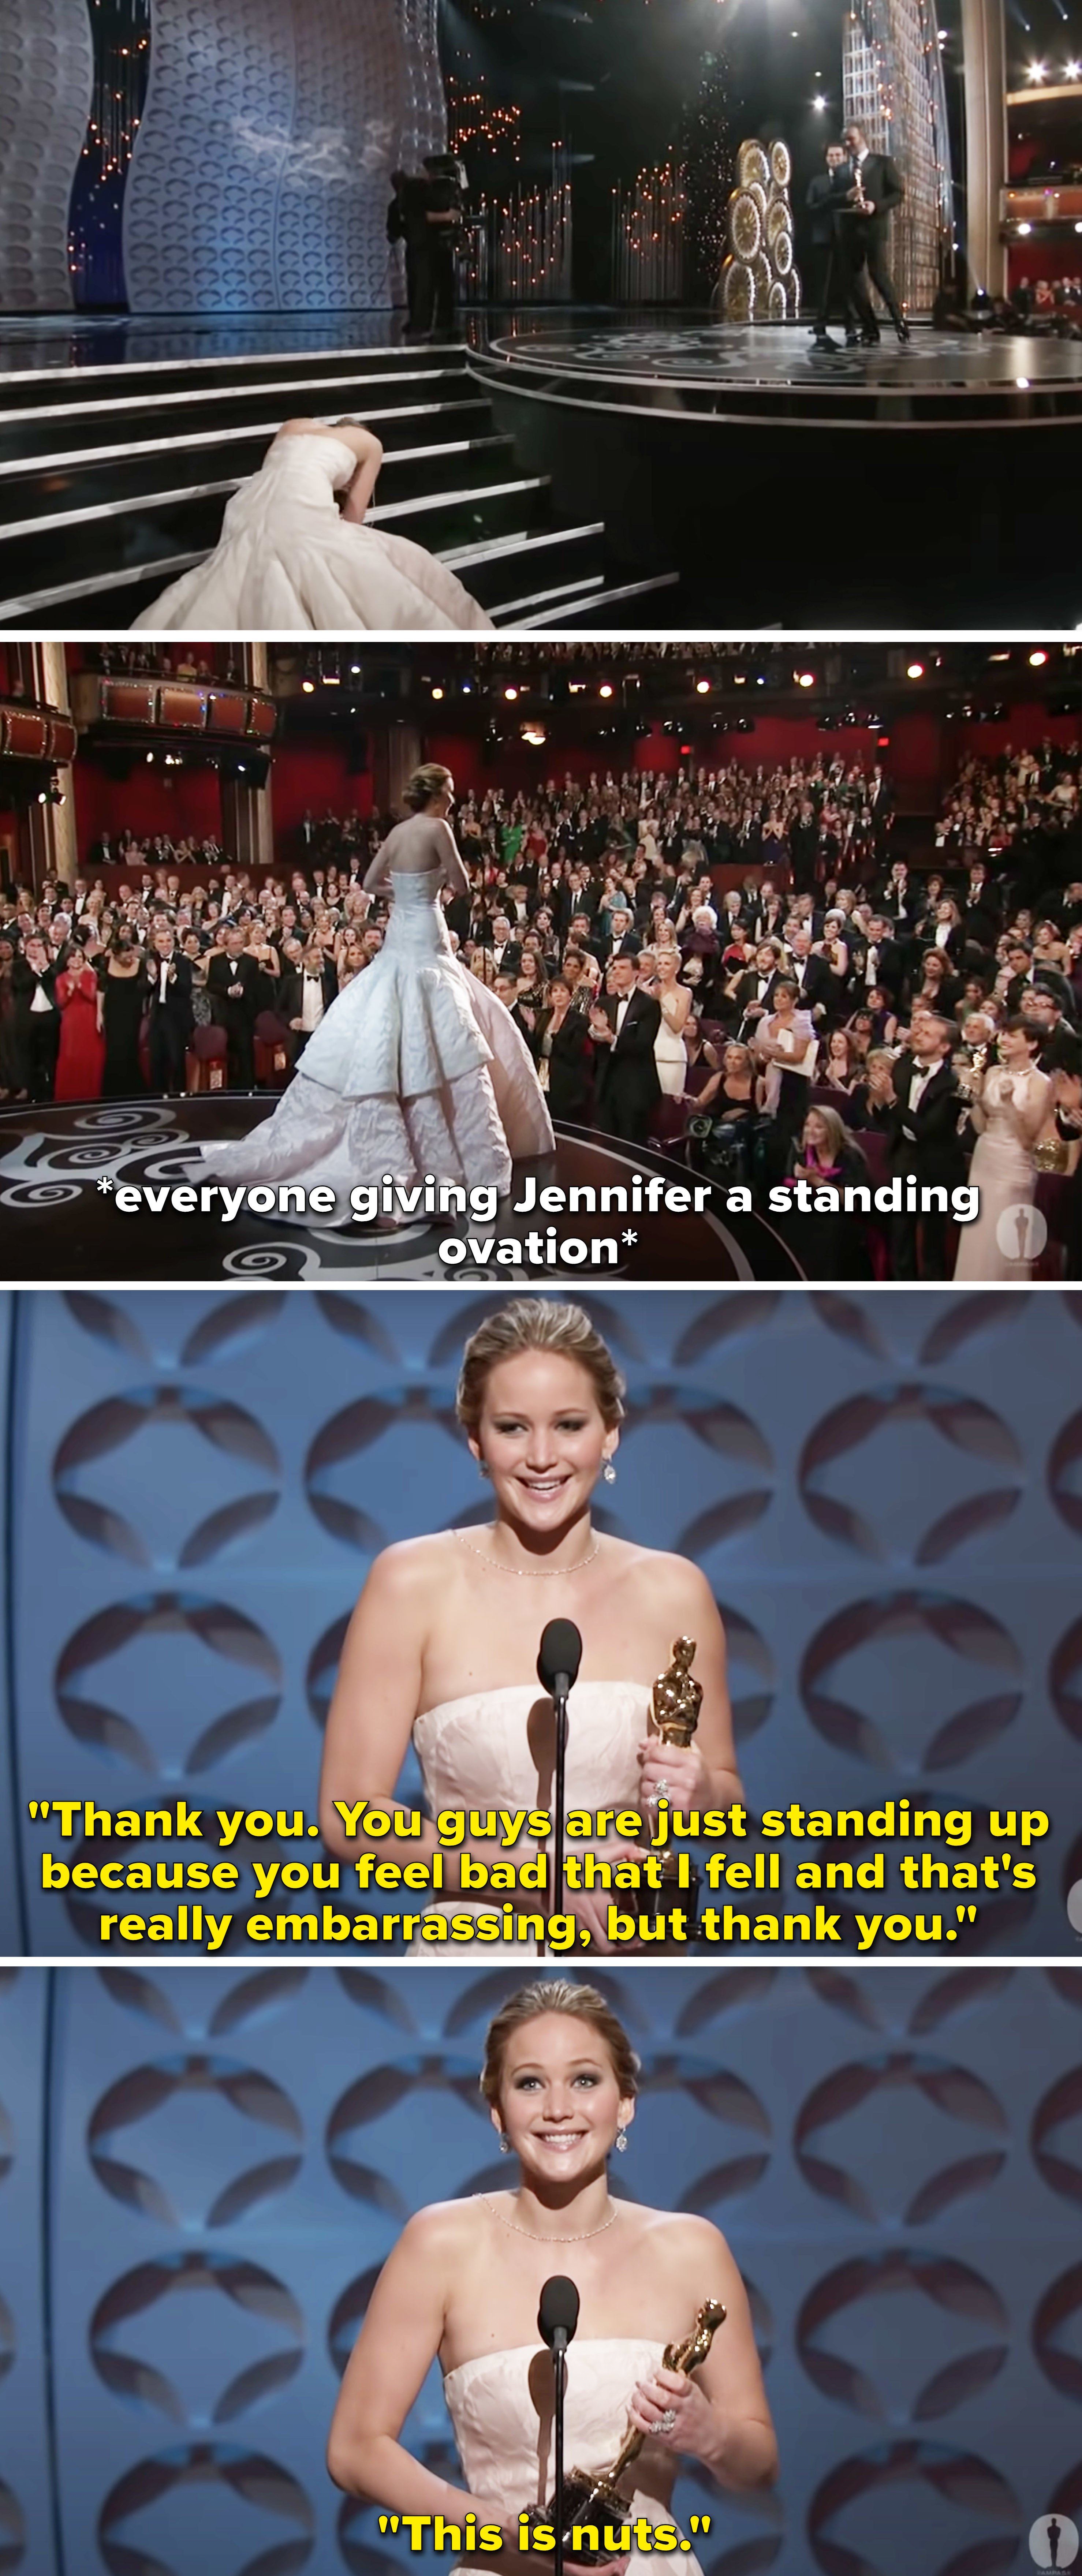 Jennifer says that people are standing up because she fell and it&#x27;s embarrassing